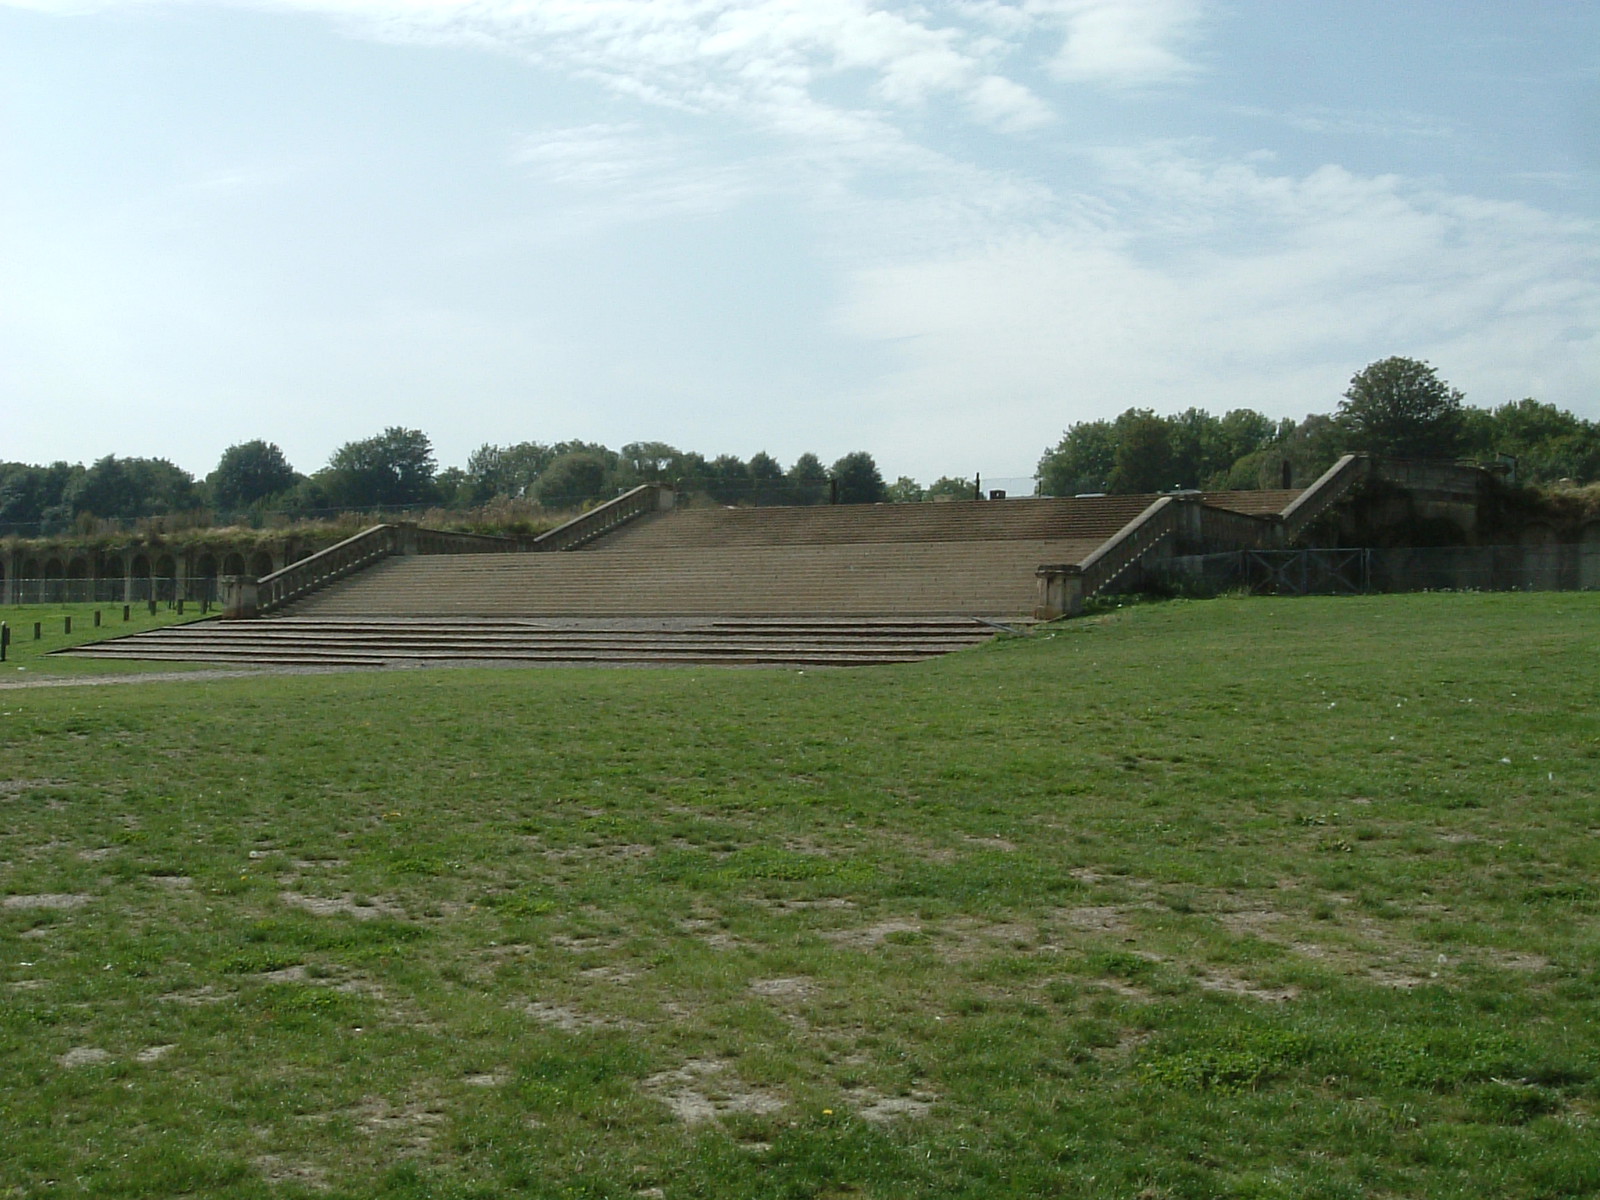 The first set of steps to the terrace that was once the Crystal Palace